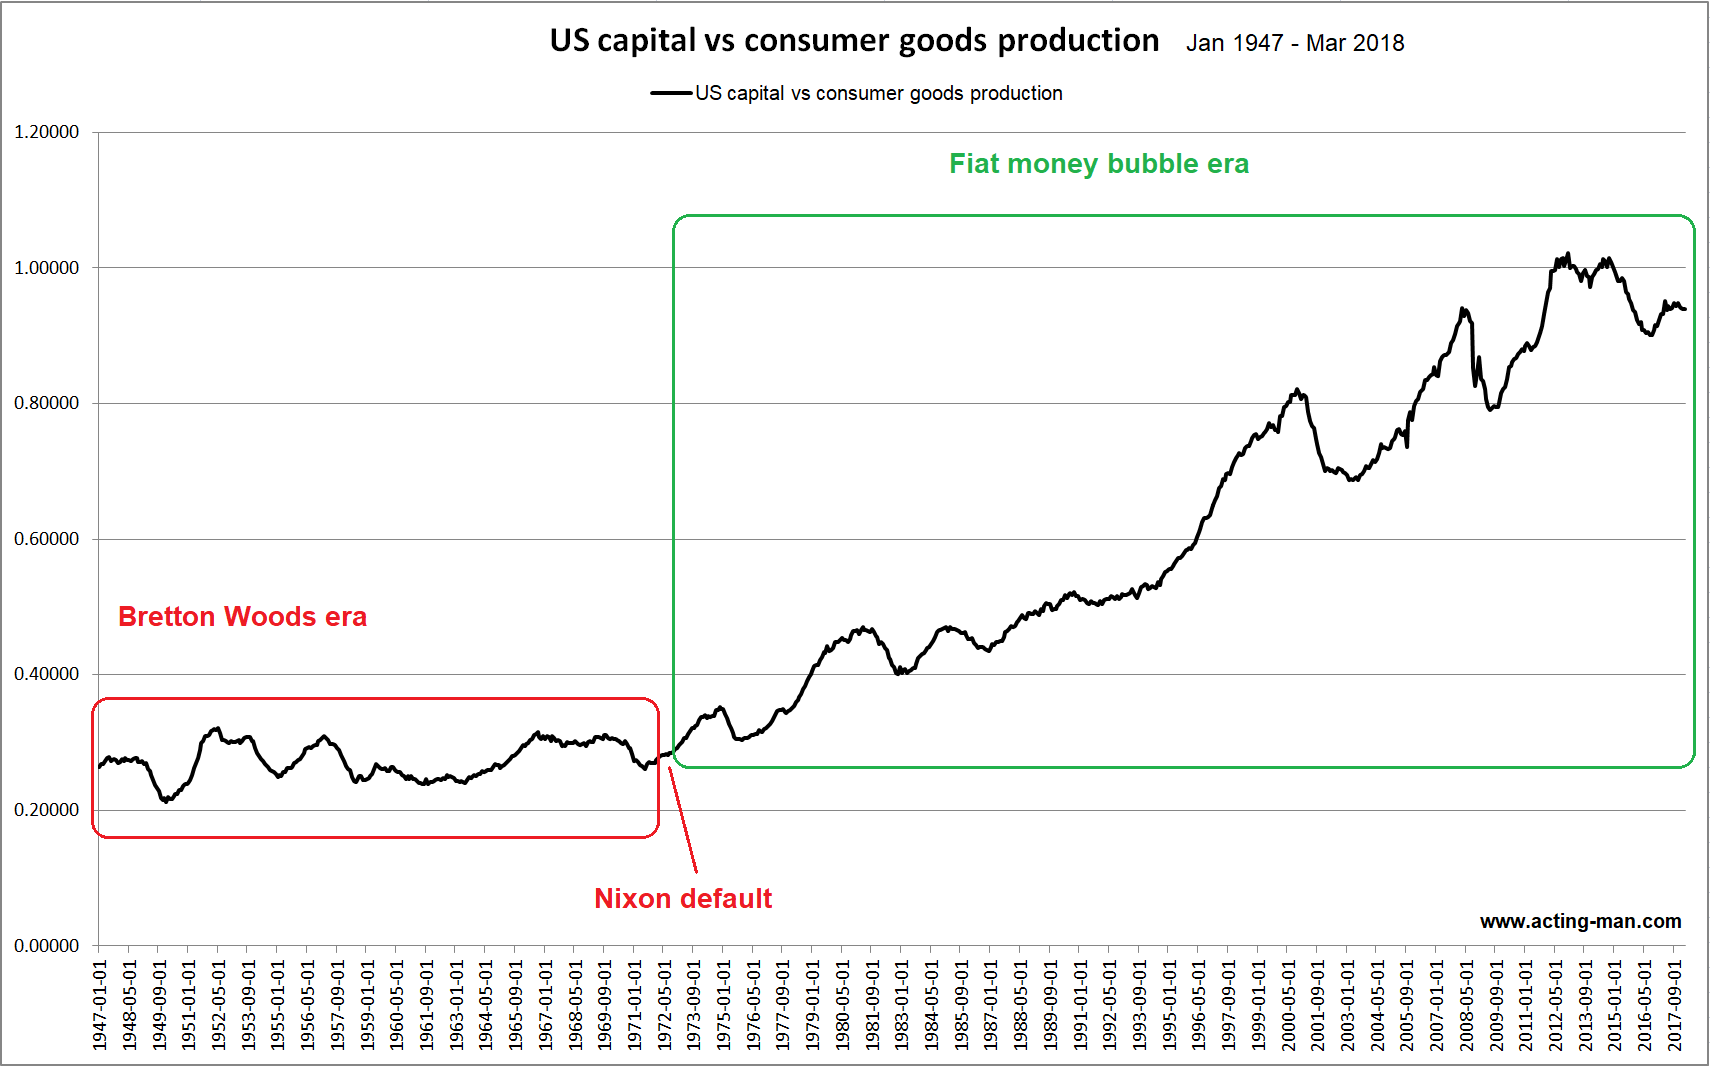 US Capital Vs Consumer Goods Production 1947 To 2018